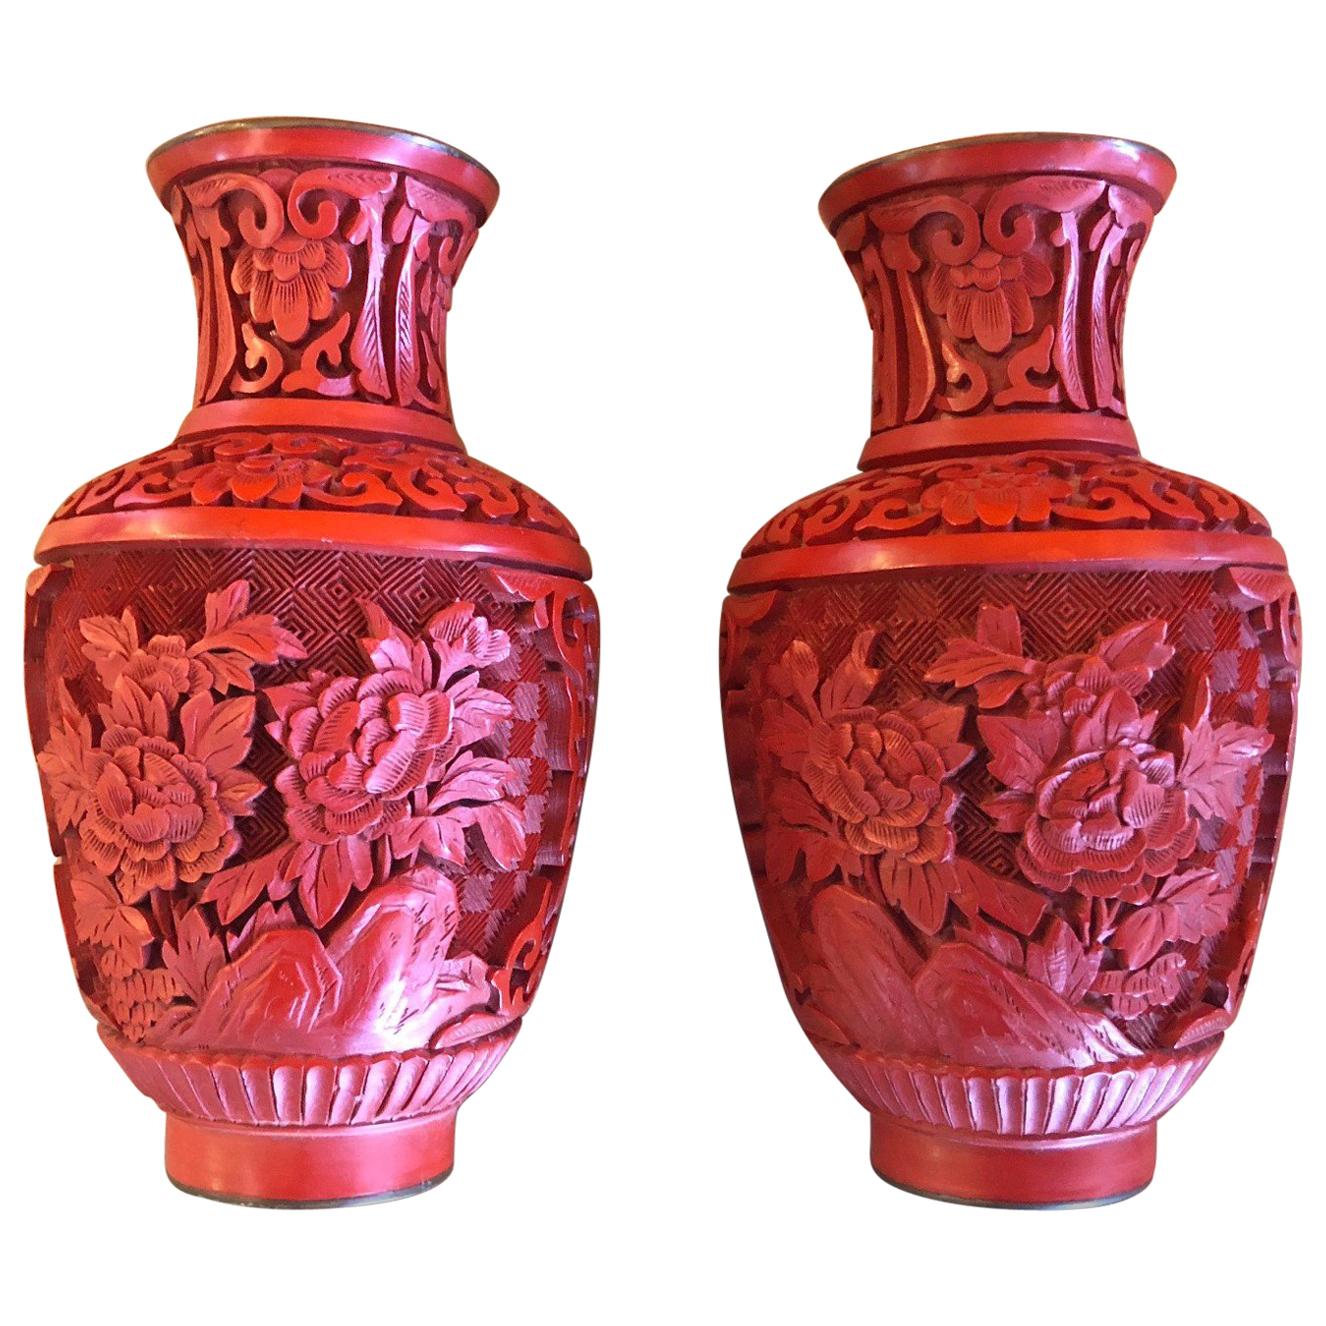 Pair of Chinese Mirror Image Cinnabar Lacquered Vases